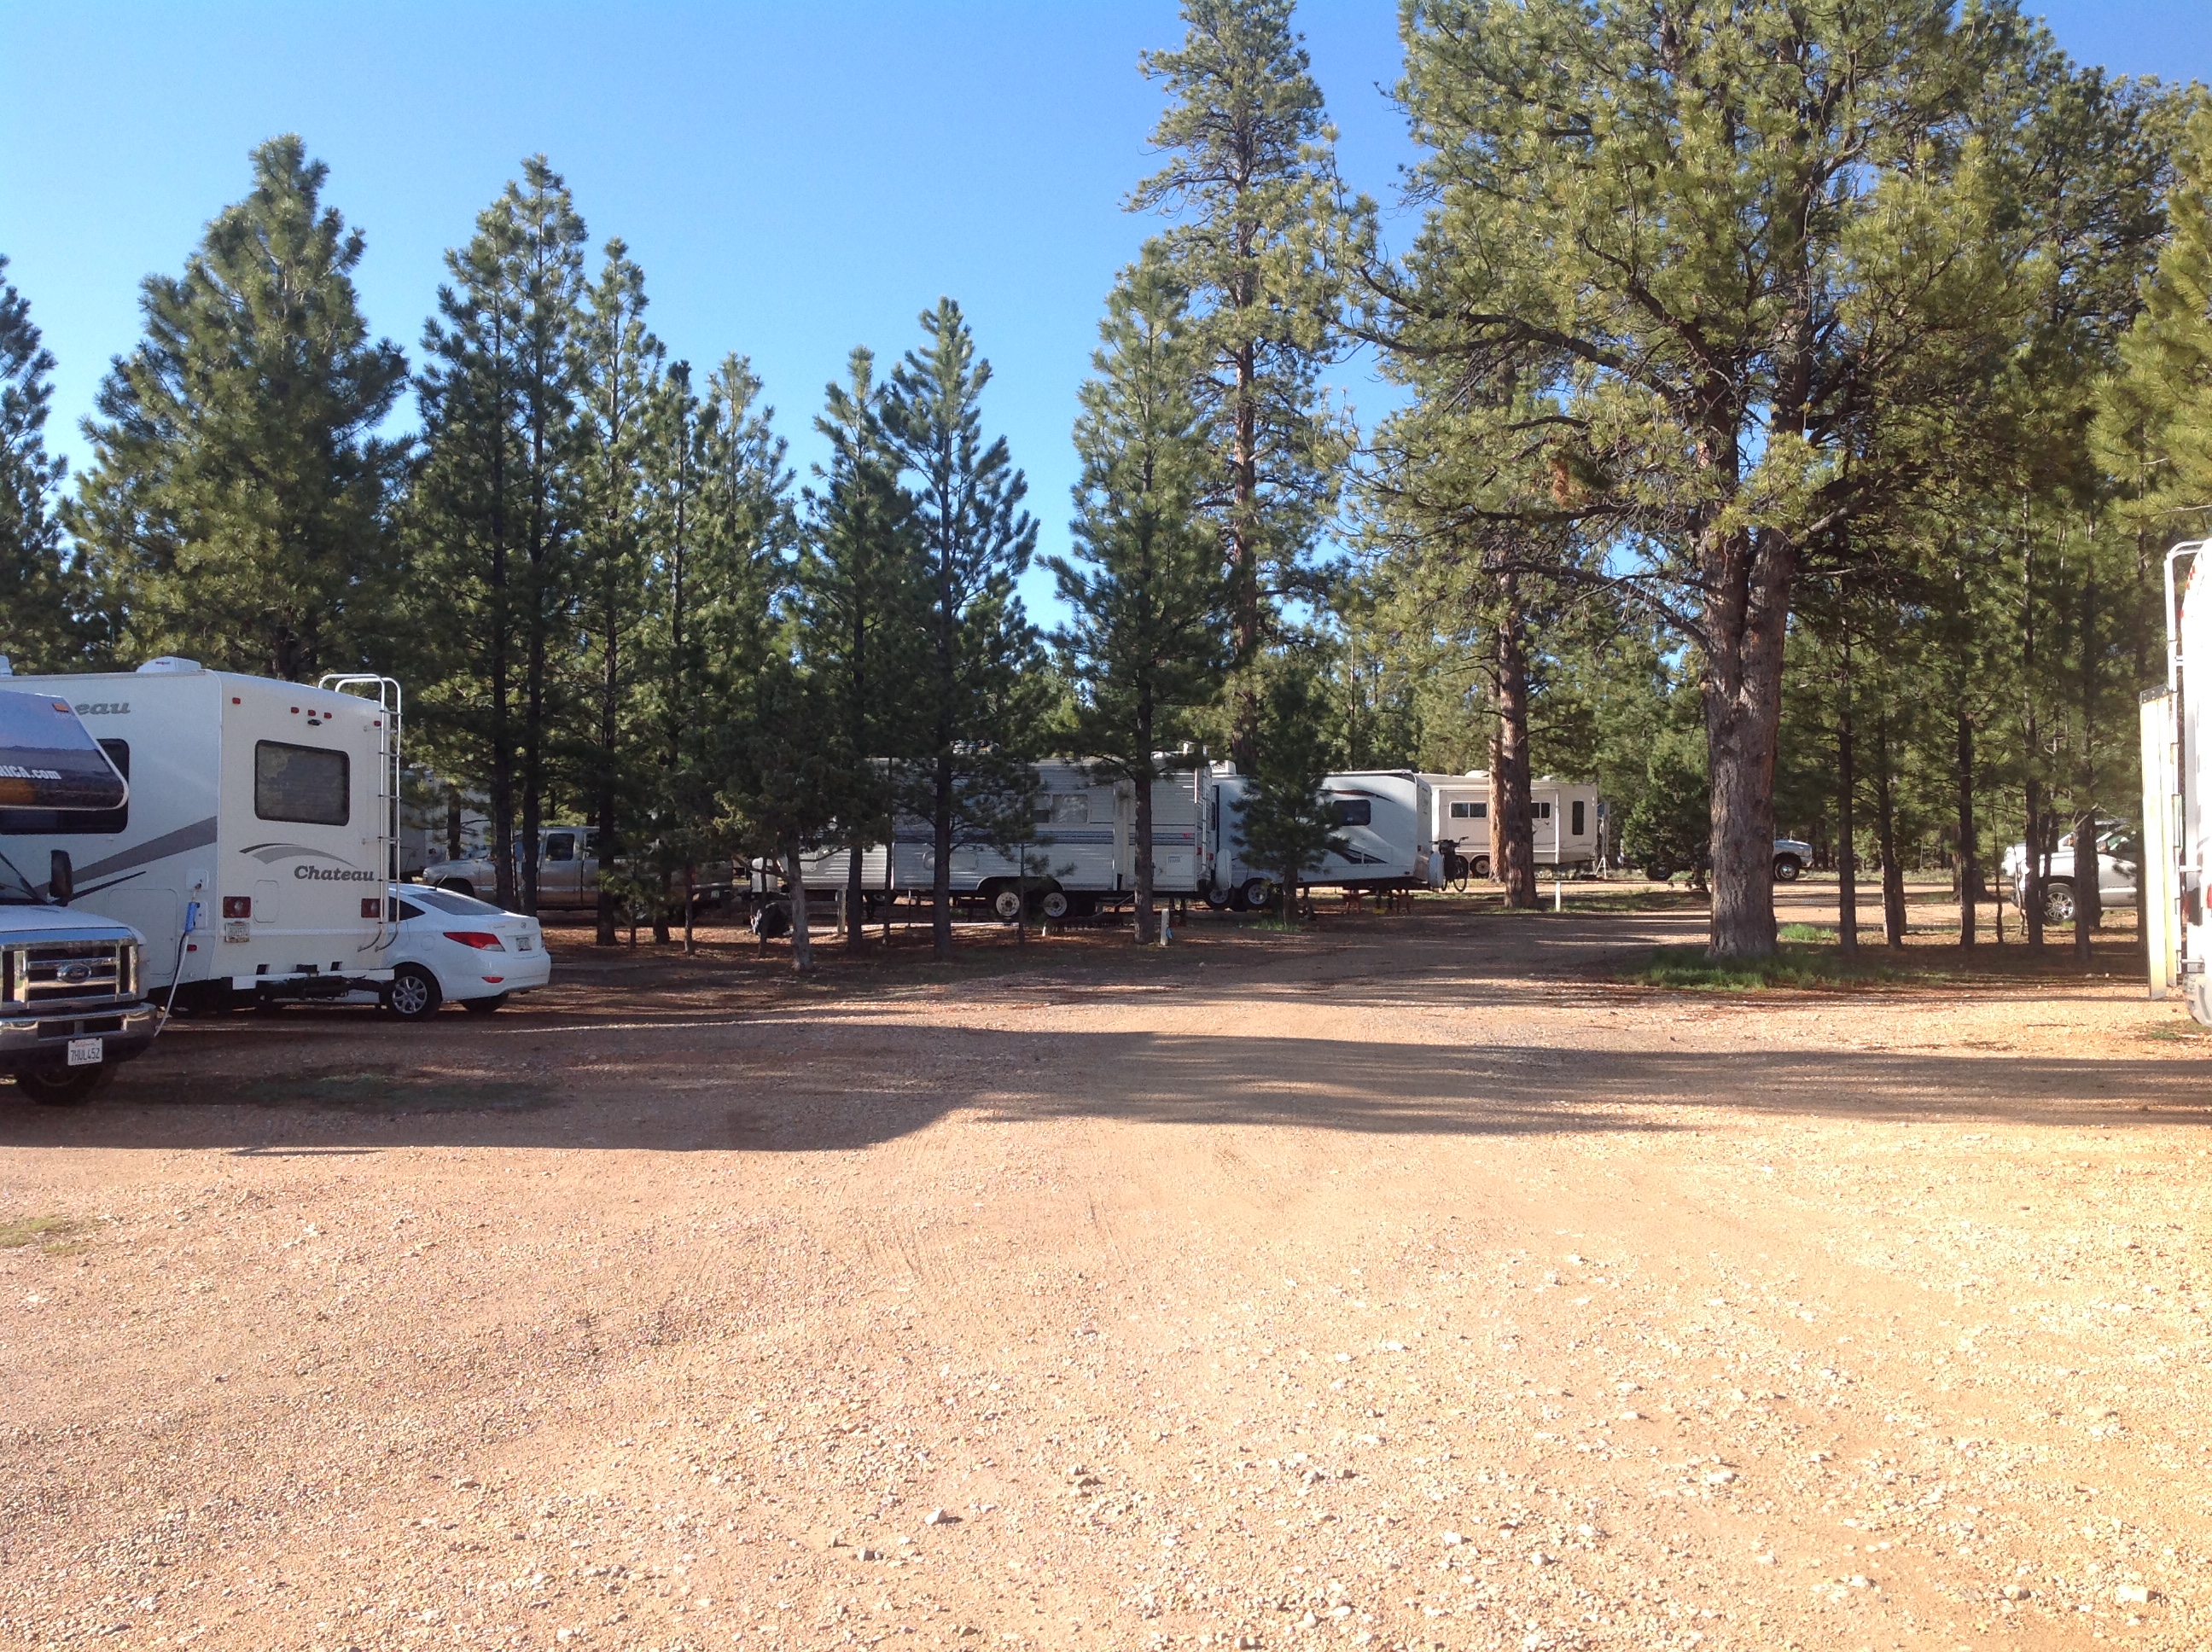 Bryce Canyon Pines RV Park - RV sites